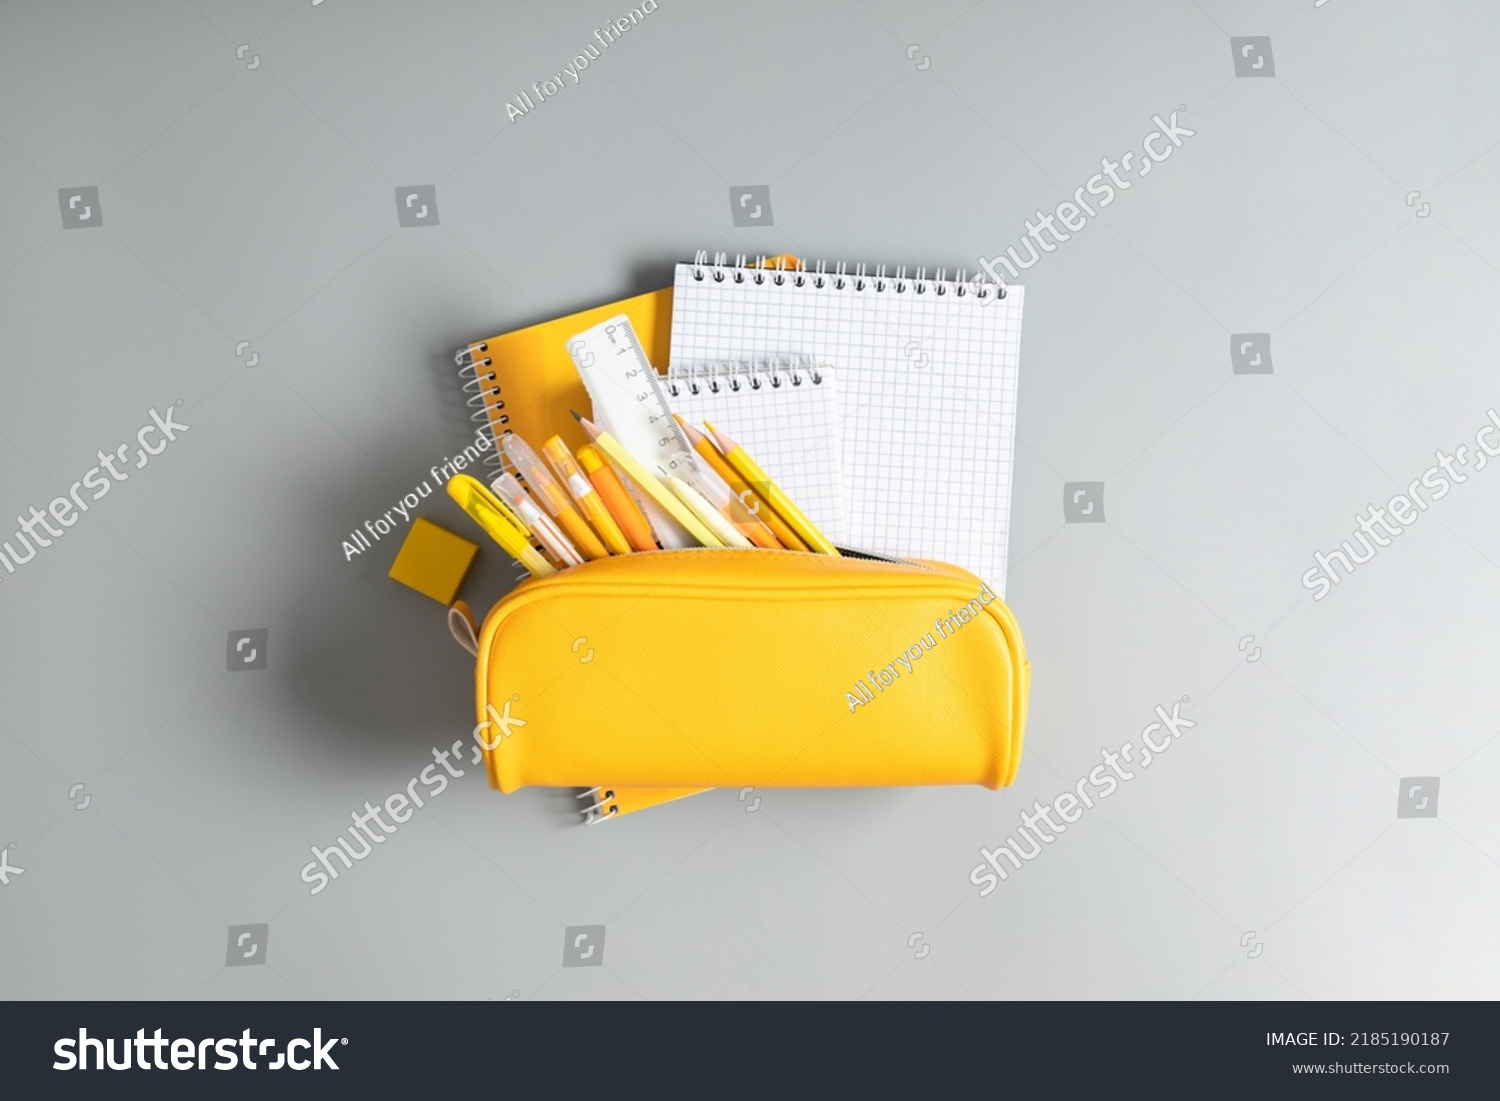 Back to school concept. Yellow school pencil case with filling school stationery, notebook, pens, pencils. Yellow school accessories on grey background. Flat lay, top view, copy space #2185190187